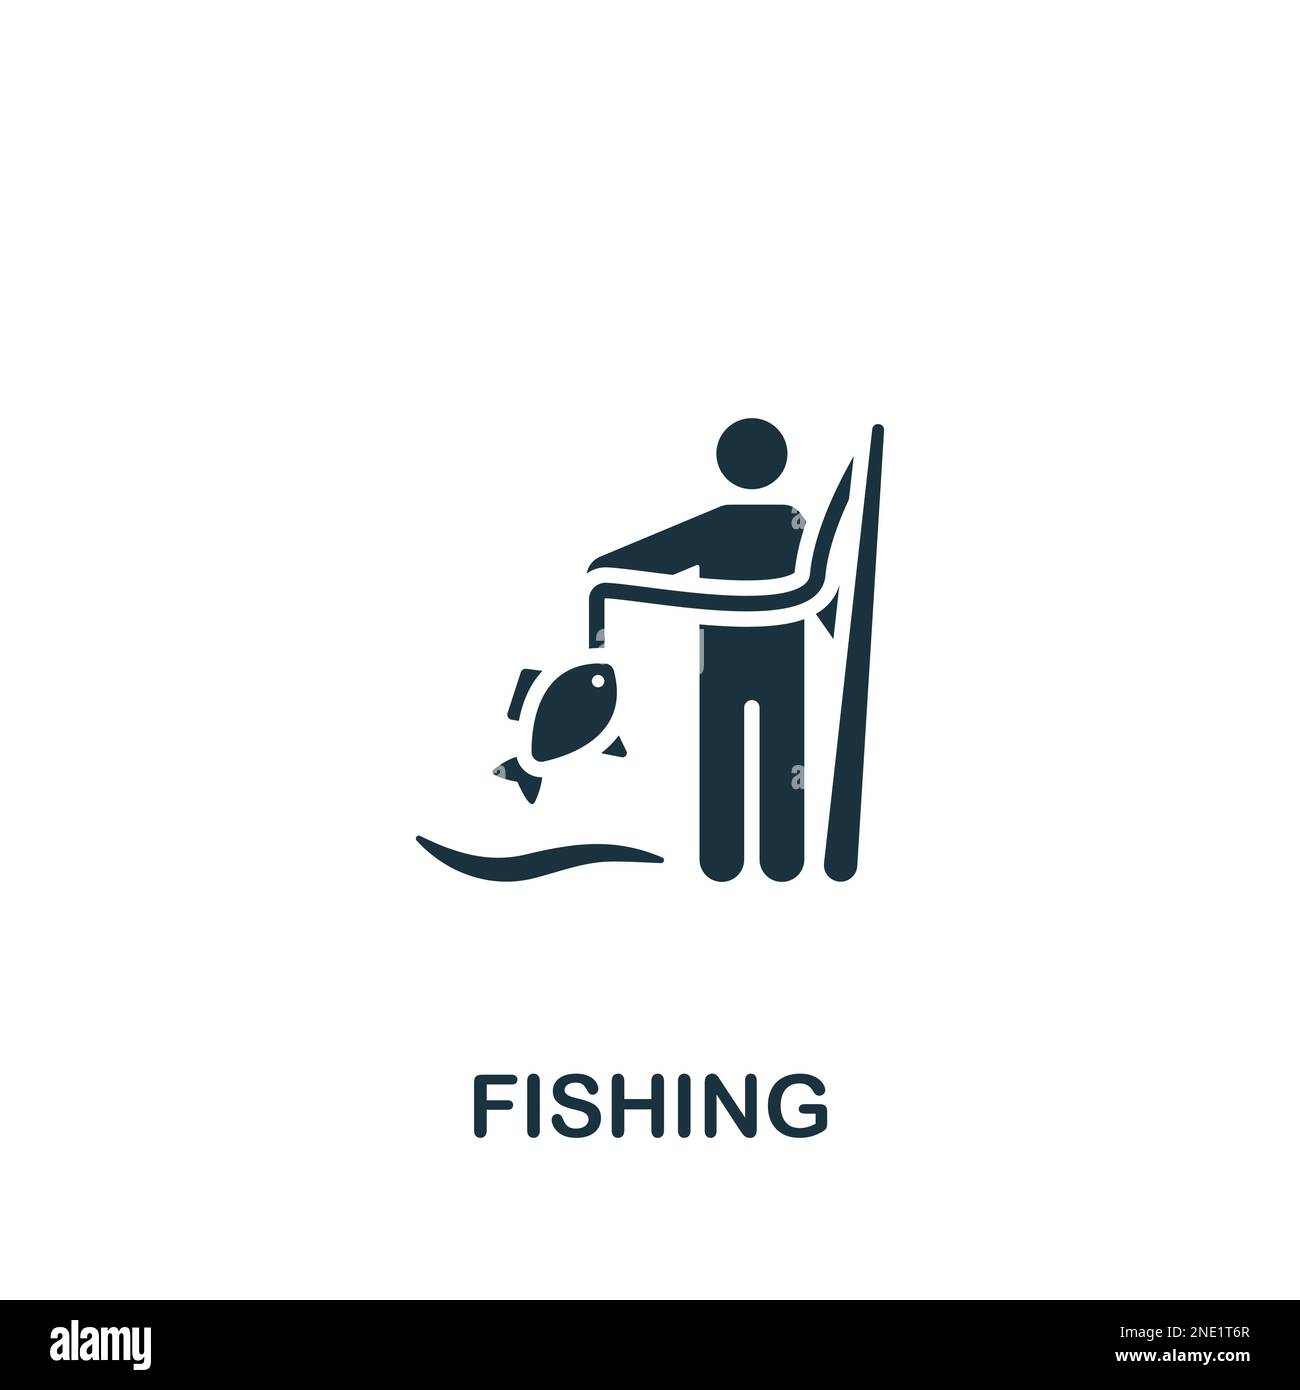 Fishing icon. Monochrome simple sign from hobby collection. Fishing icon for logo, templates, web design and infographics. Stock Vector